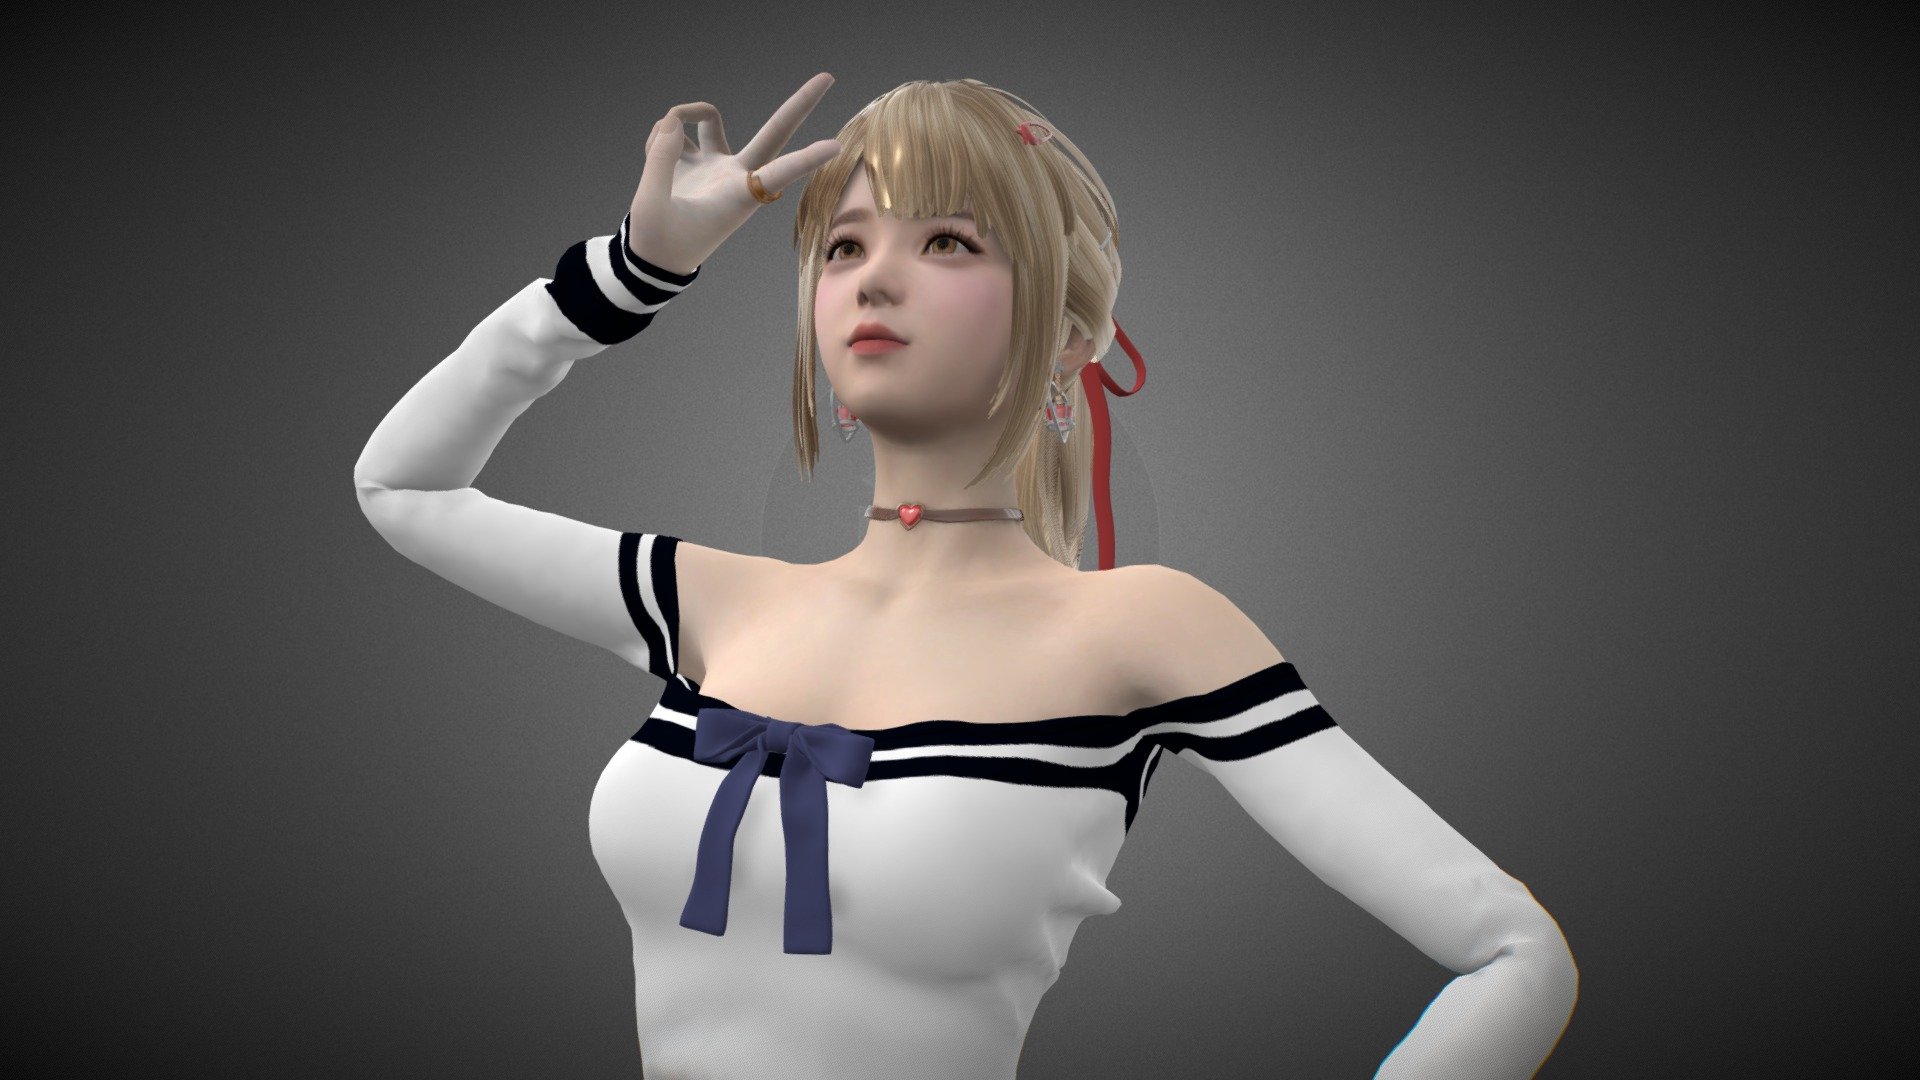 Not my model. I didn't do it.

Model extracted from Together BnB Early Release Game by Aurora Games.
I fix the texture, UV and pose only 3d model